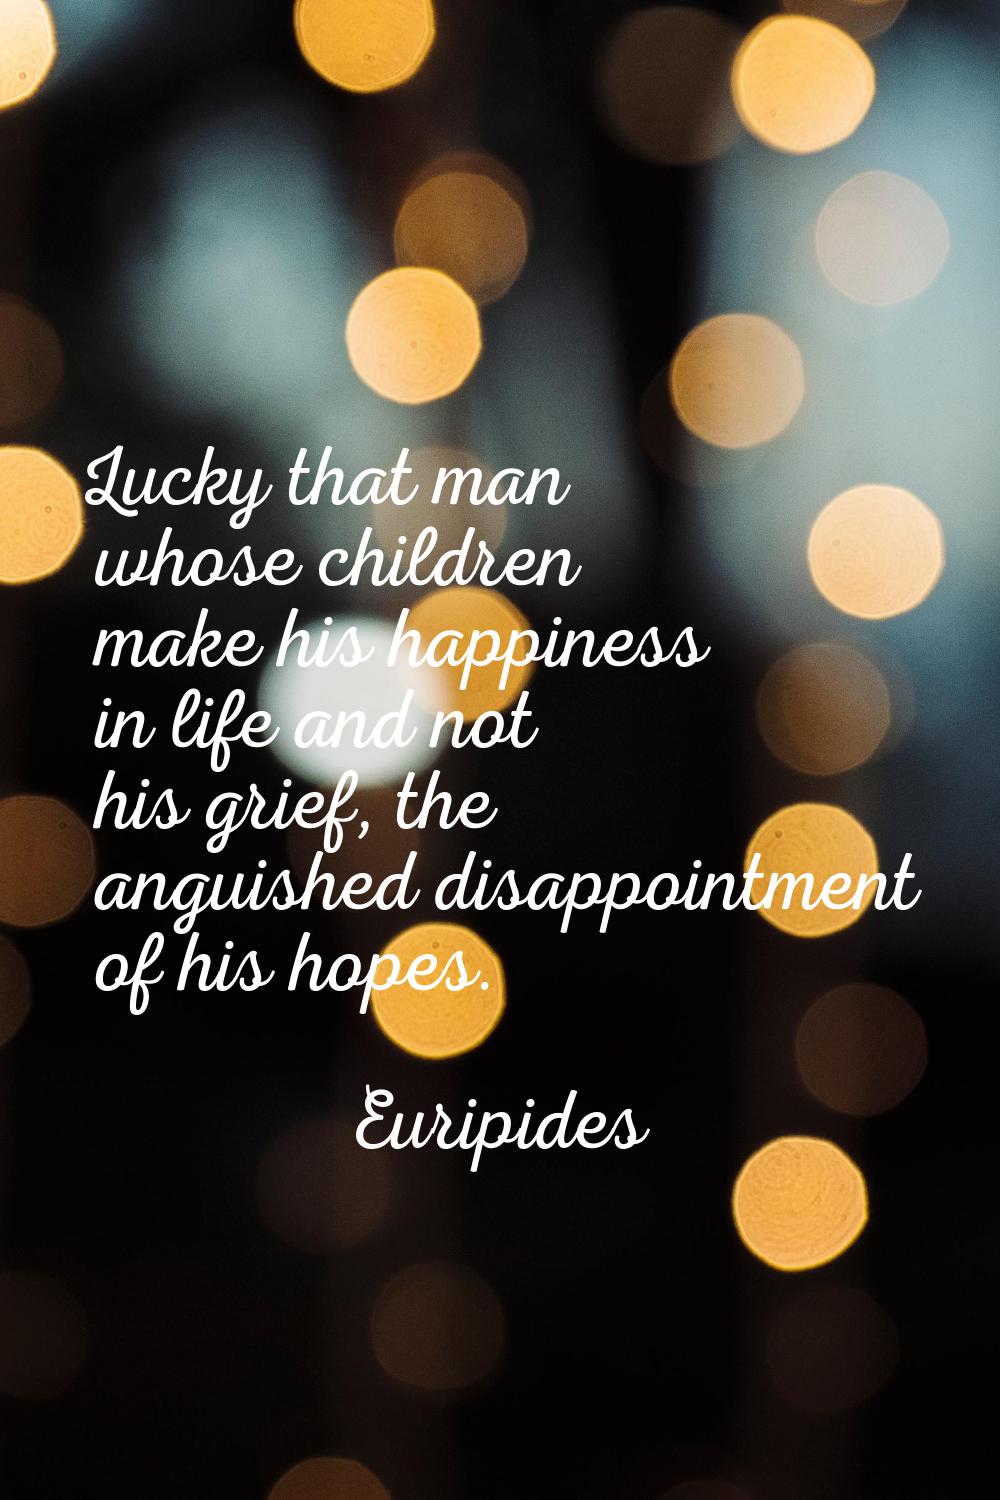 Lucky that man whose children make his happiness in life and not his grief, the anguished disappoin